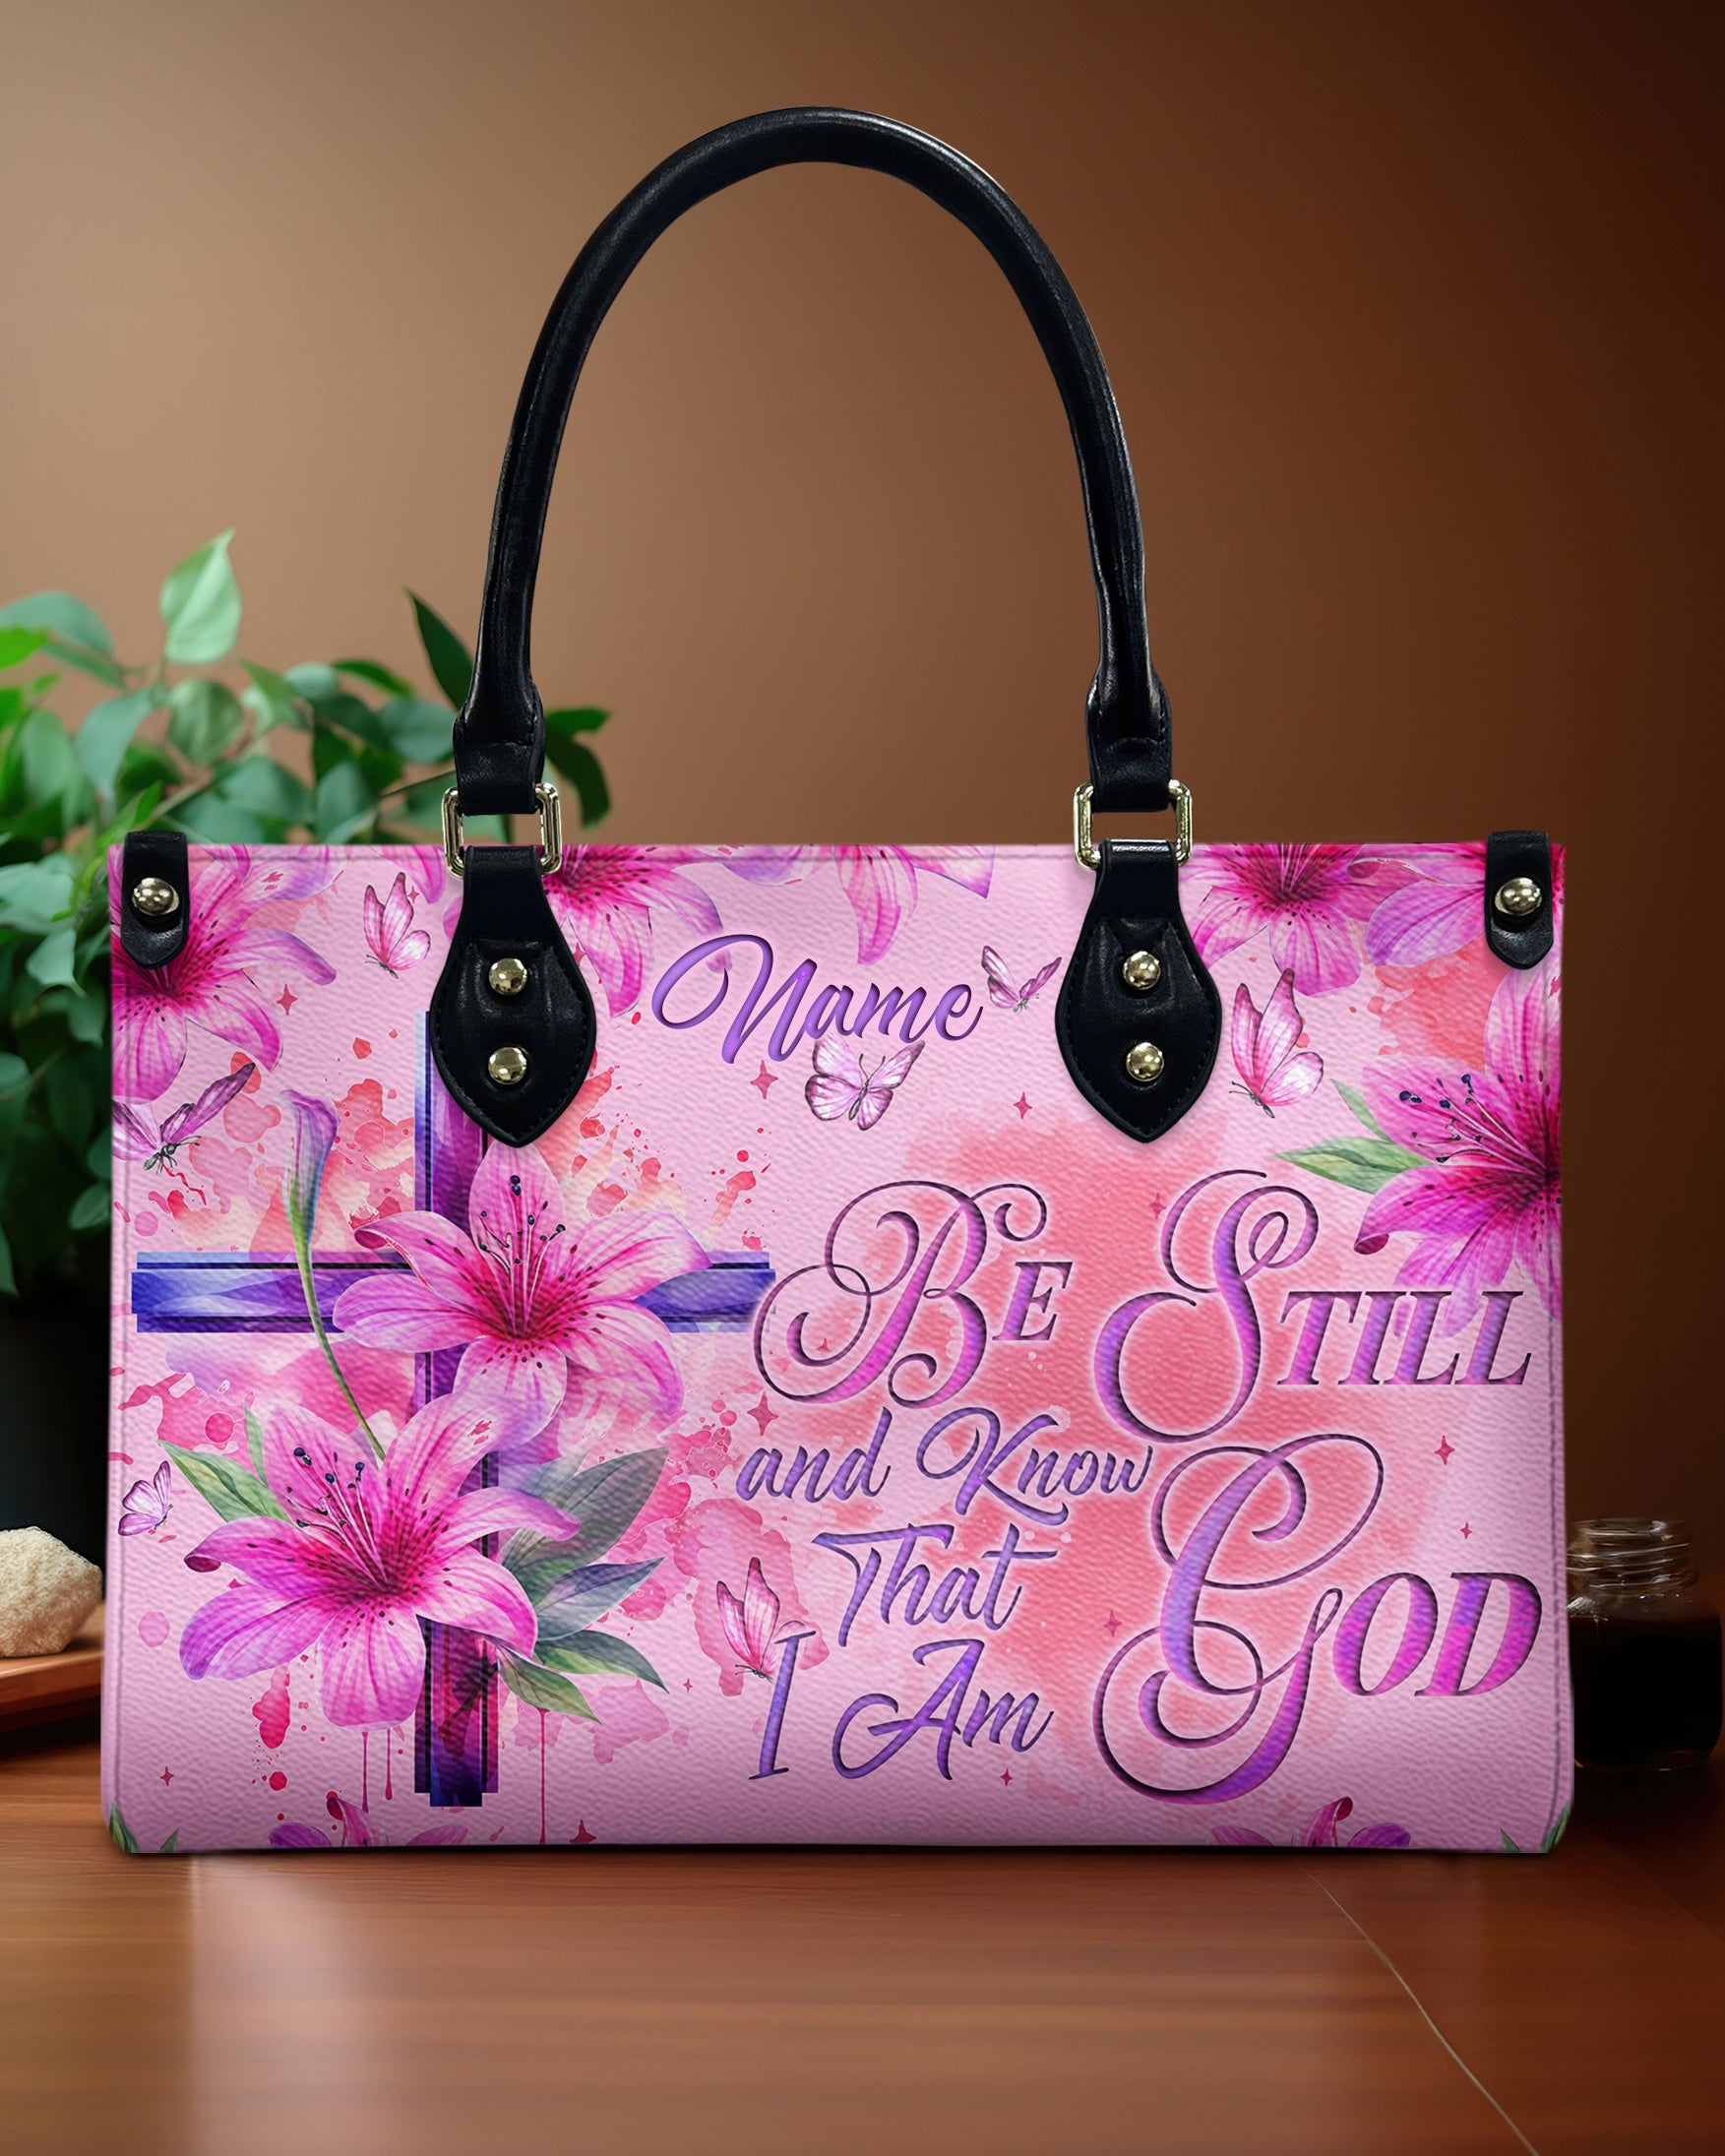 Be Still And Know That I Am God Leather Handbag - Tyqy0204244